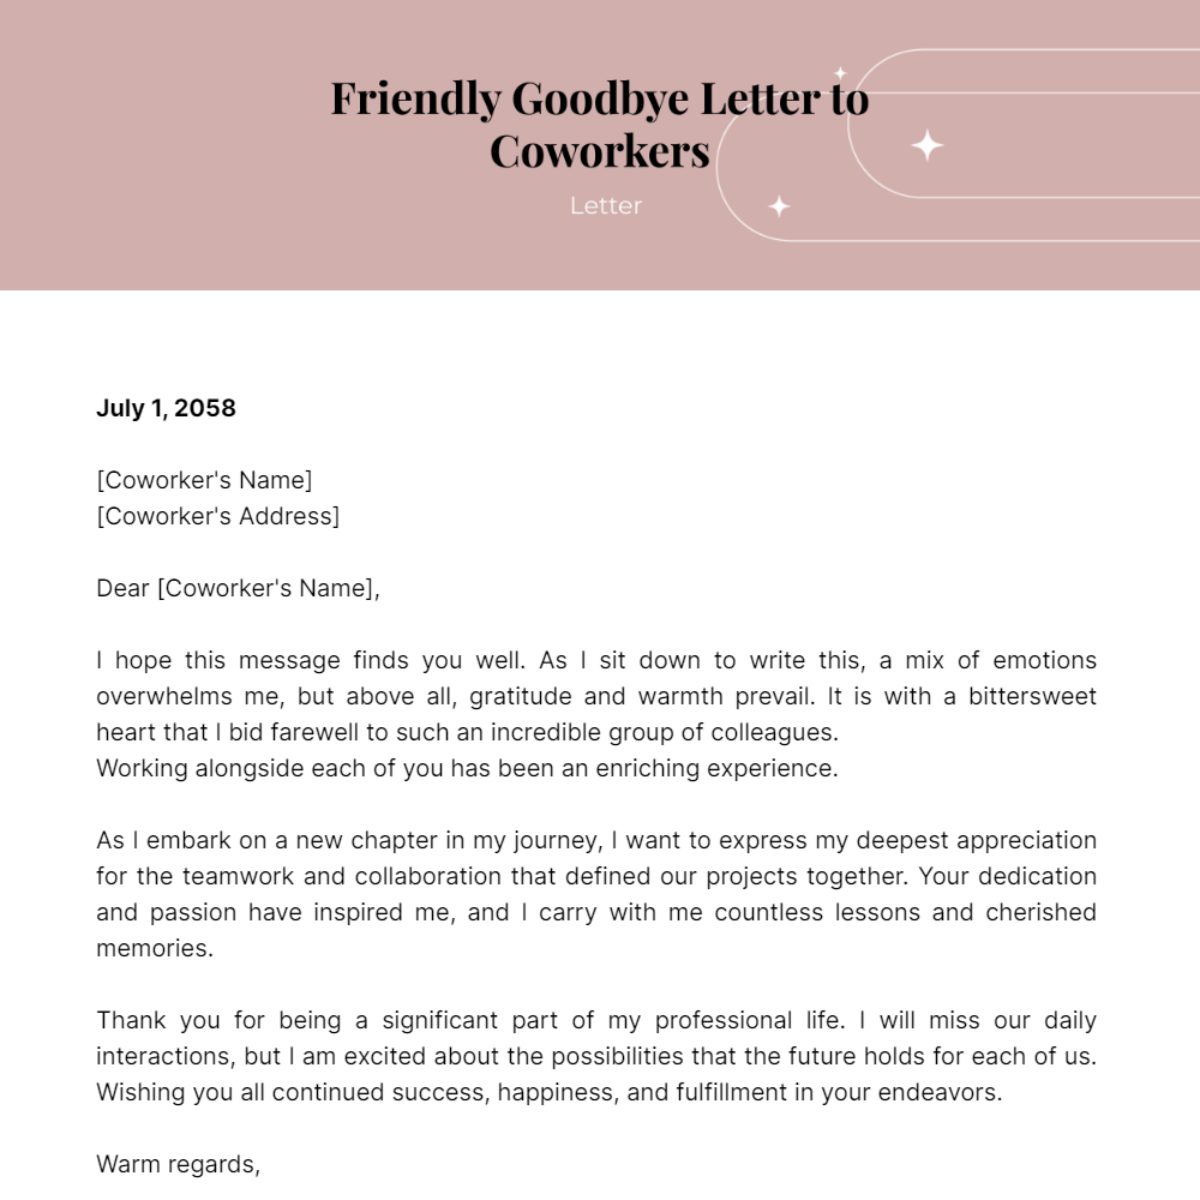 Friendly Goodbye Letter to Coworkers Template